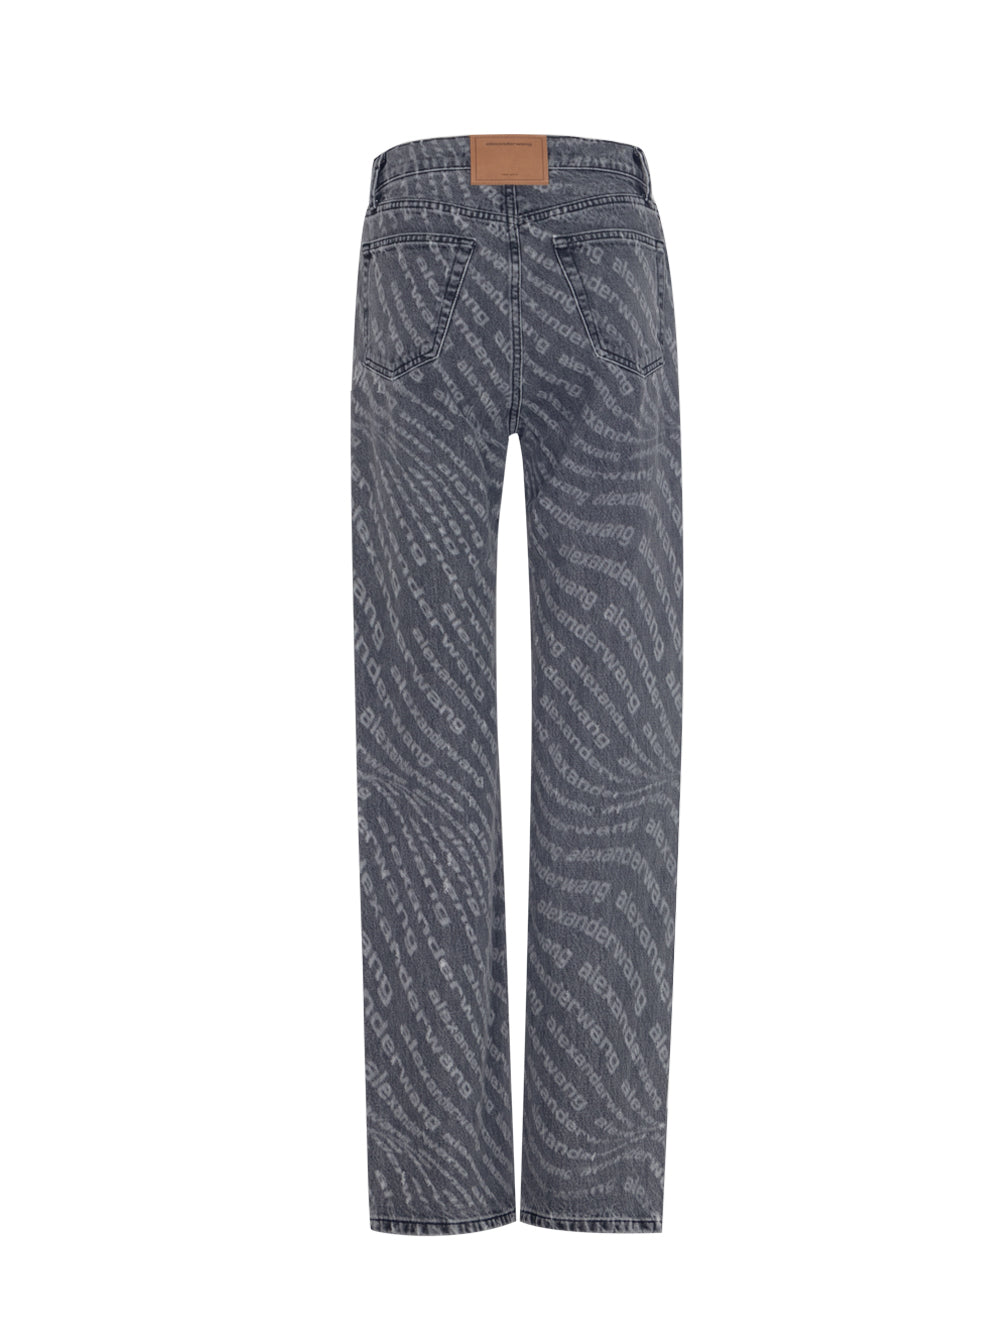 Ez - Mid Rise Relaxed Straight Jean Shredded Wave Washed Grey